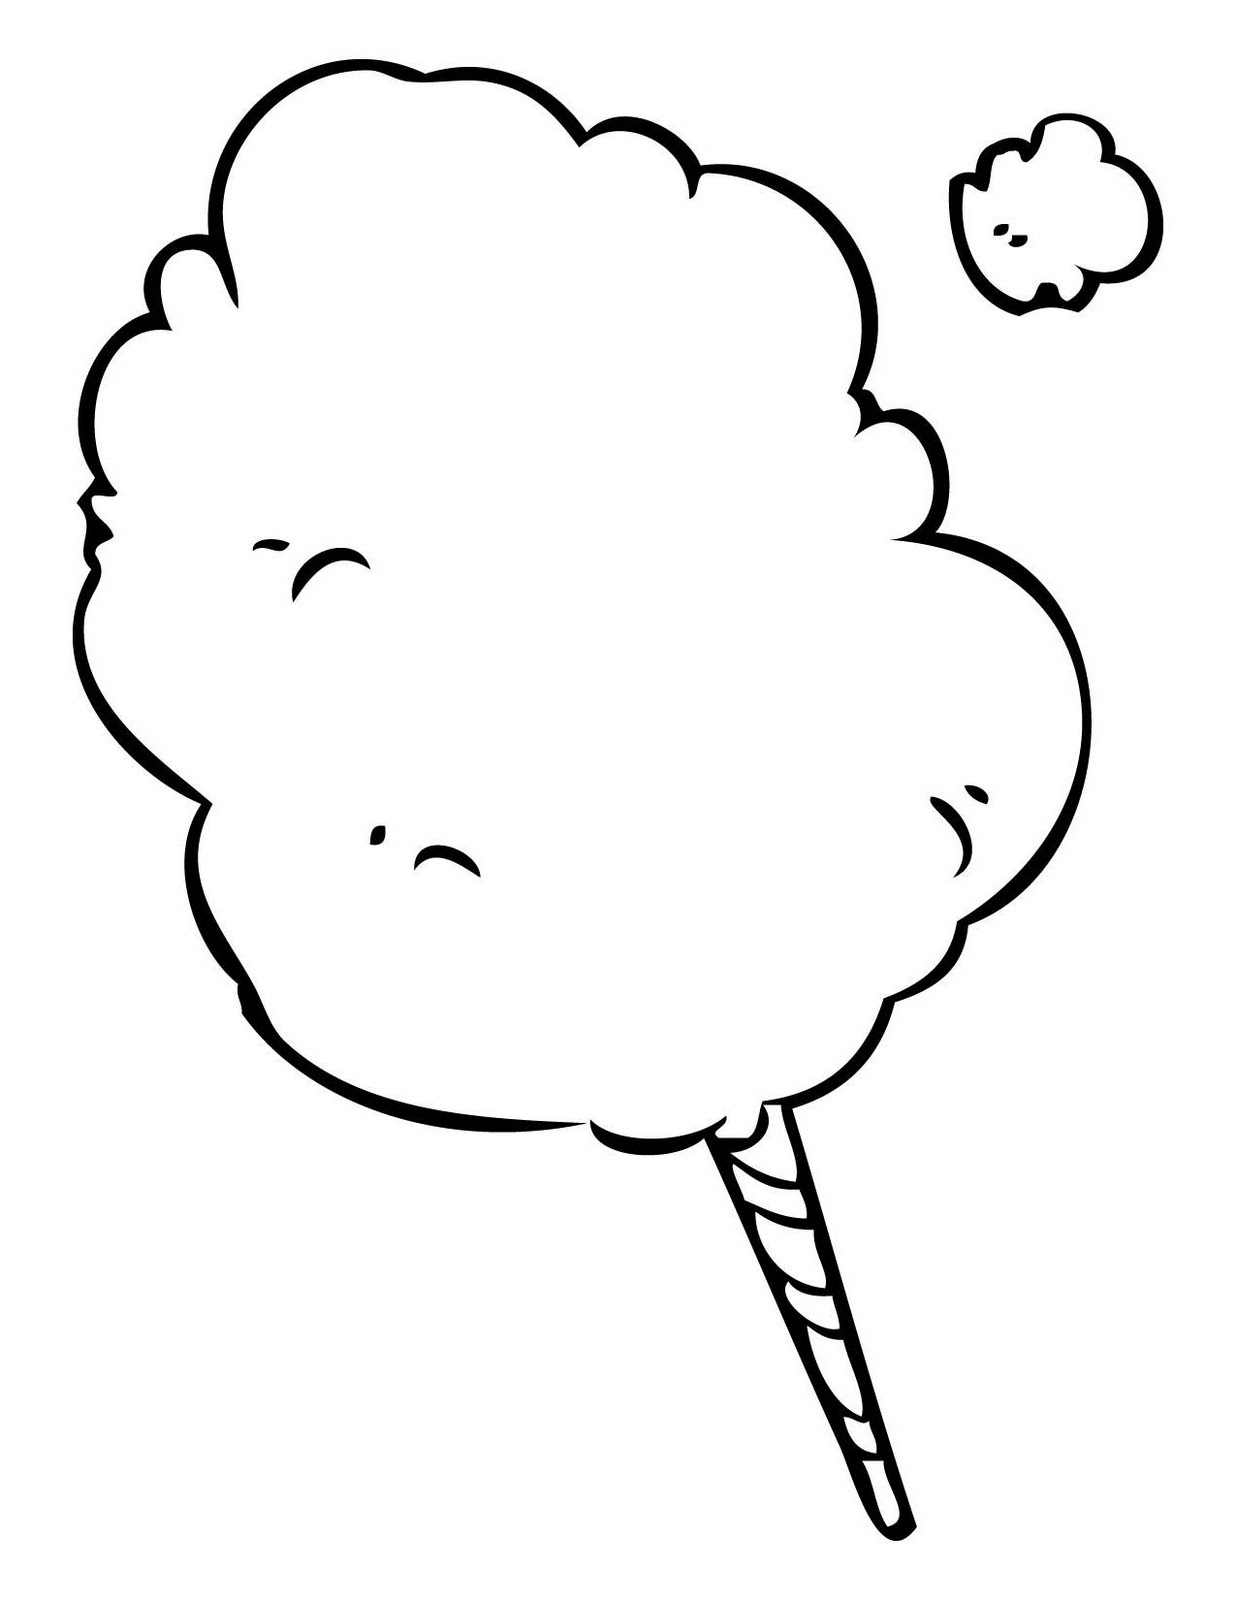 candy clipart drawing